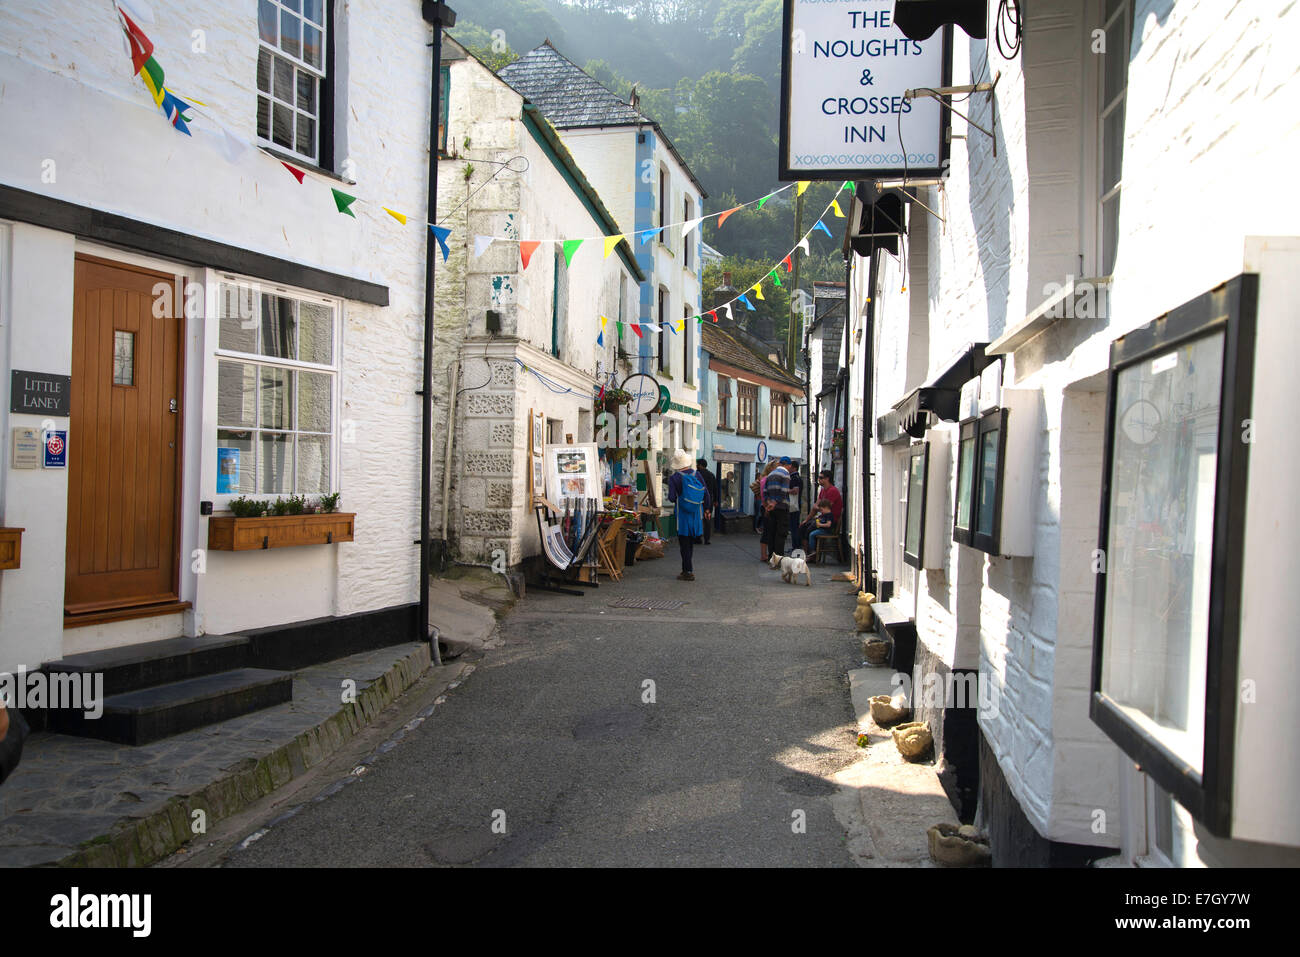 Narrow road with shops and inn sign in traditional fishing village, Cornwall, England 2014 Stock Photo